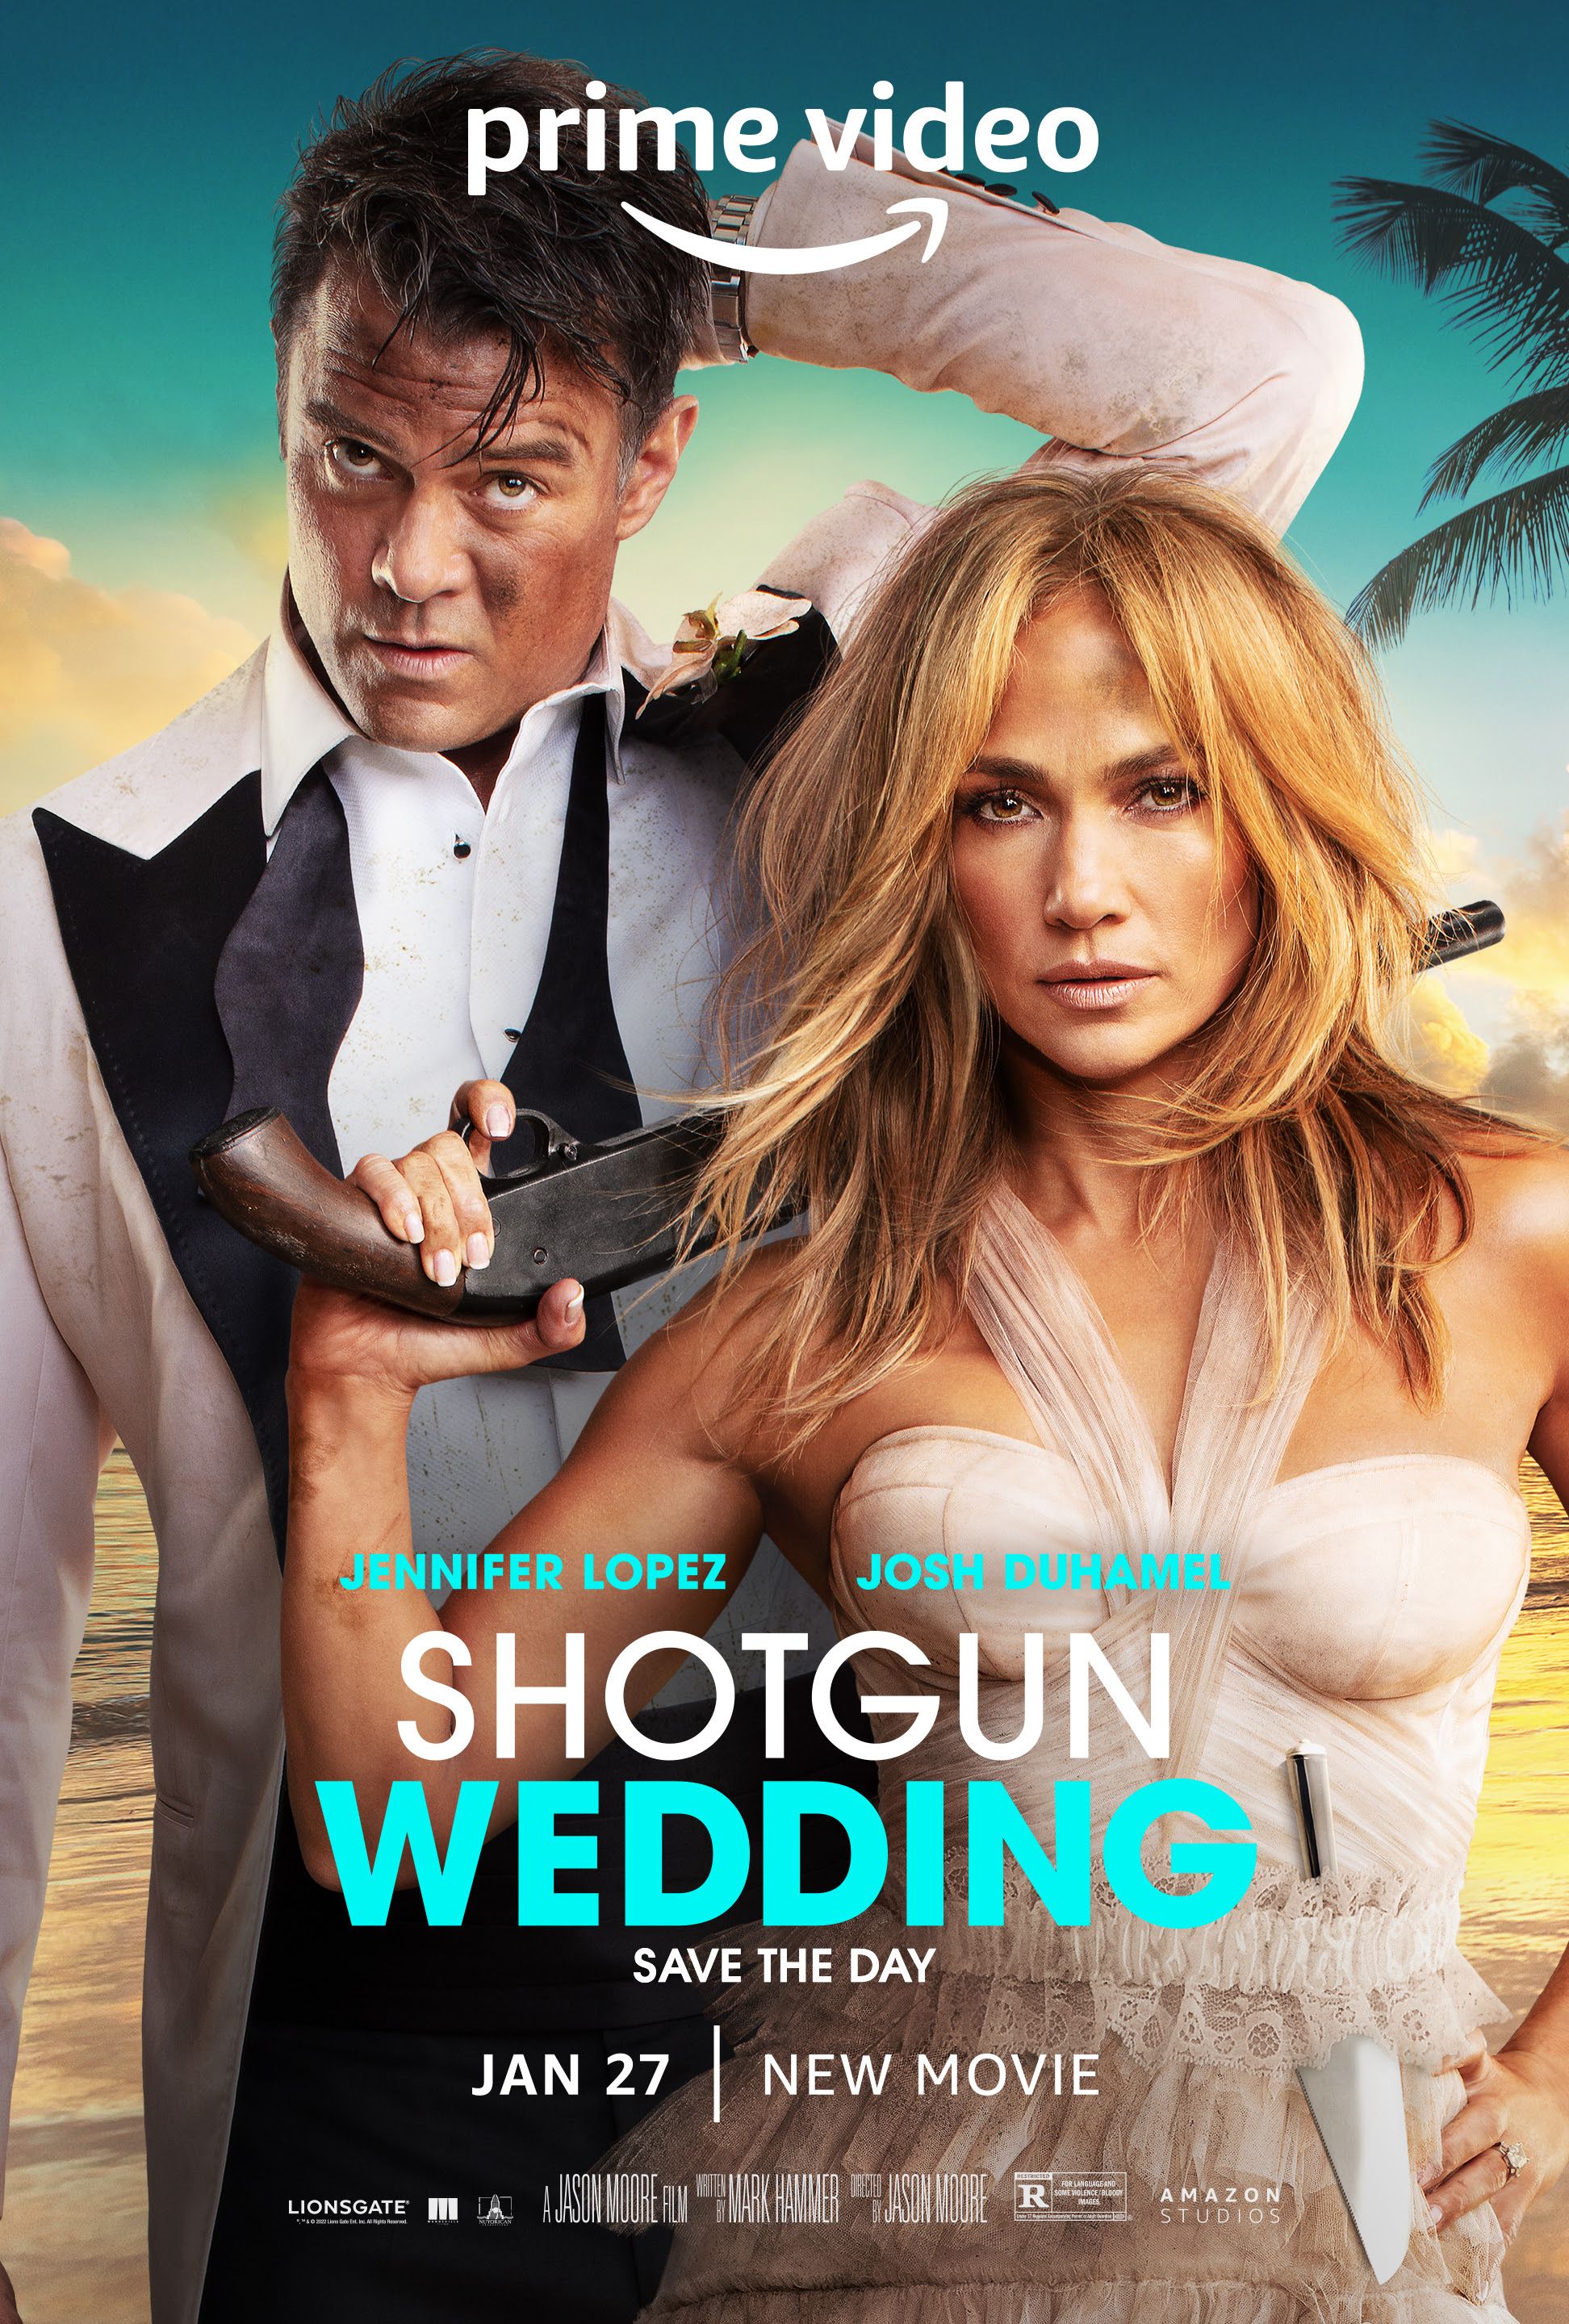 Shotgun Wedding Jennifer Lopez is Caught in the Center of a Pirate Attack in the Latest Trailer